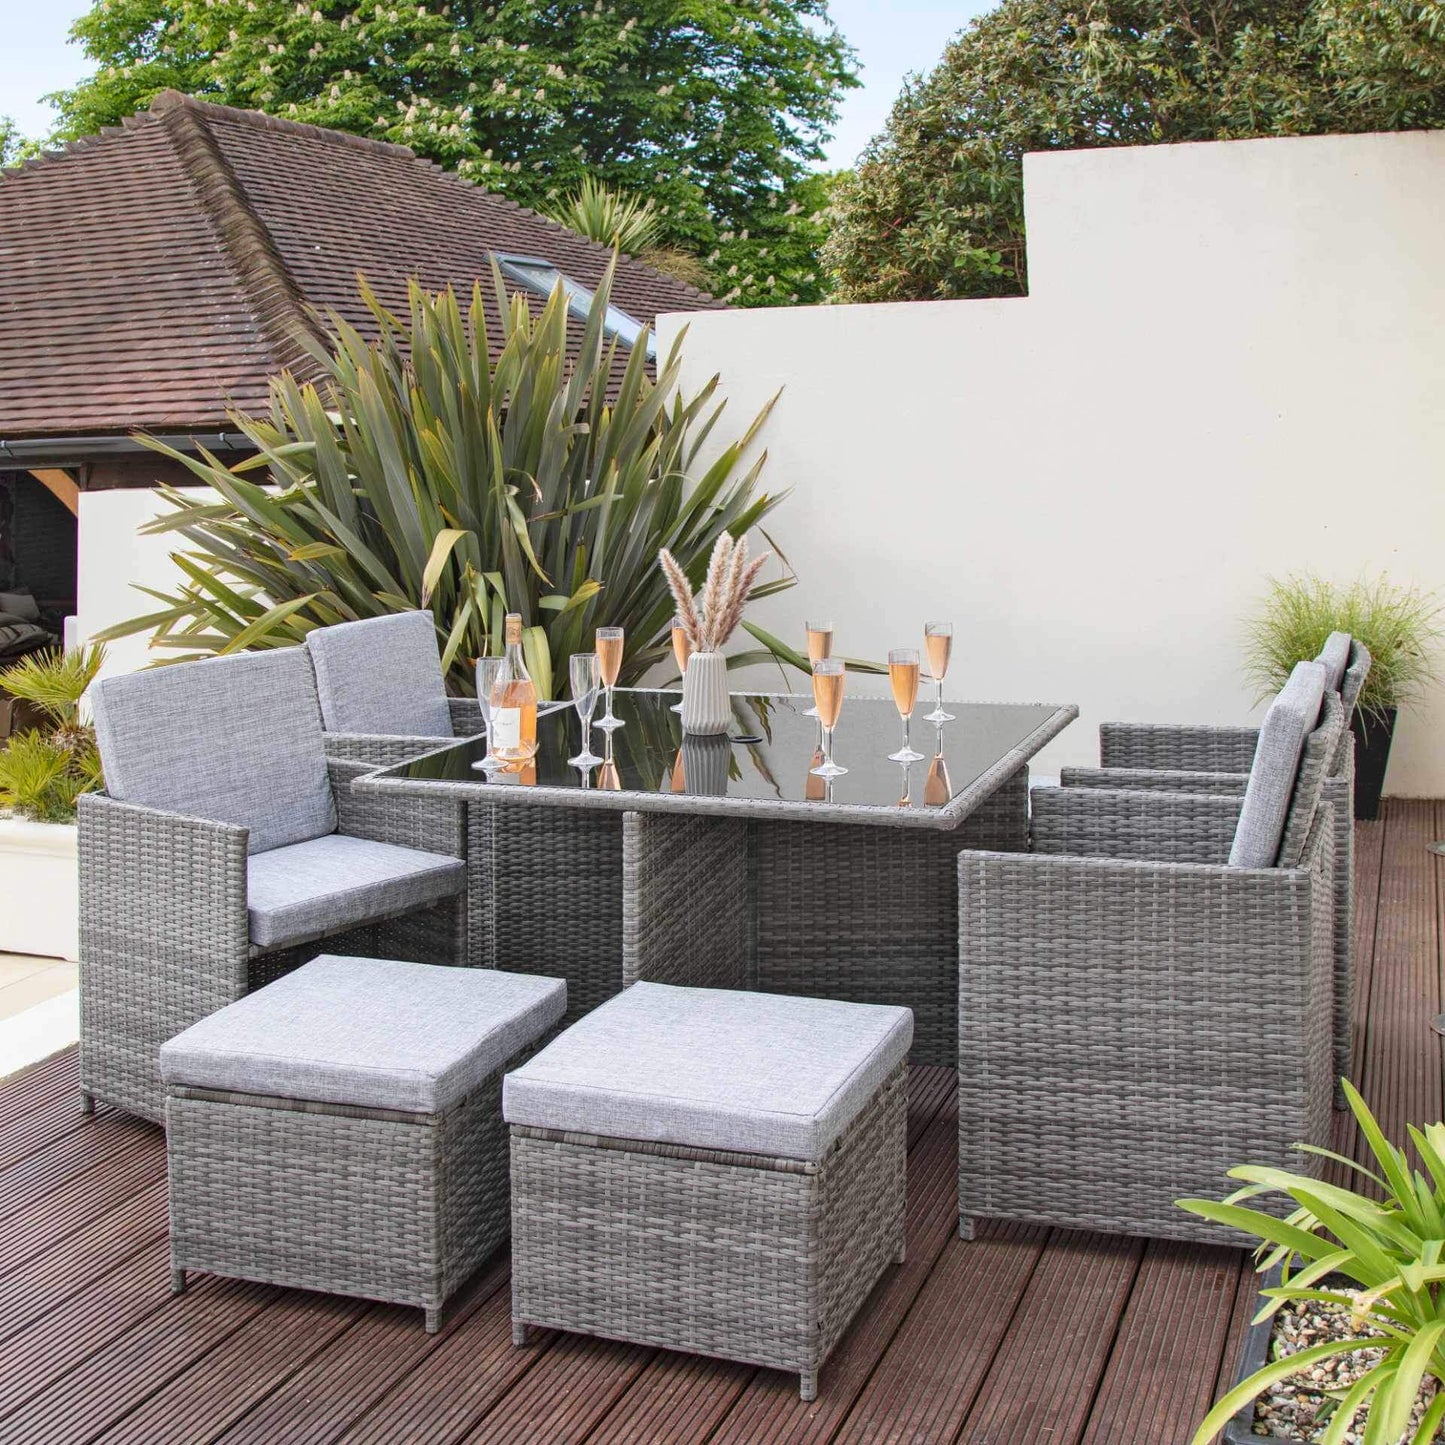 8 Seat Rattan Cube Outdoor Dining Set with Grey LED Premium Parasol - Grey Weave with Cream Cushion